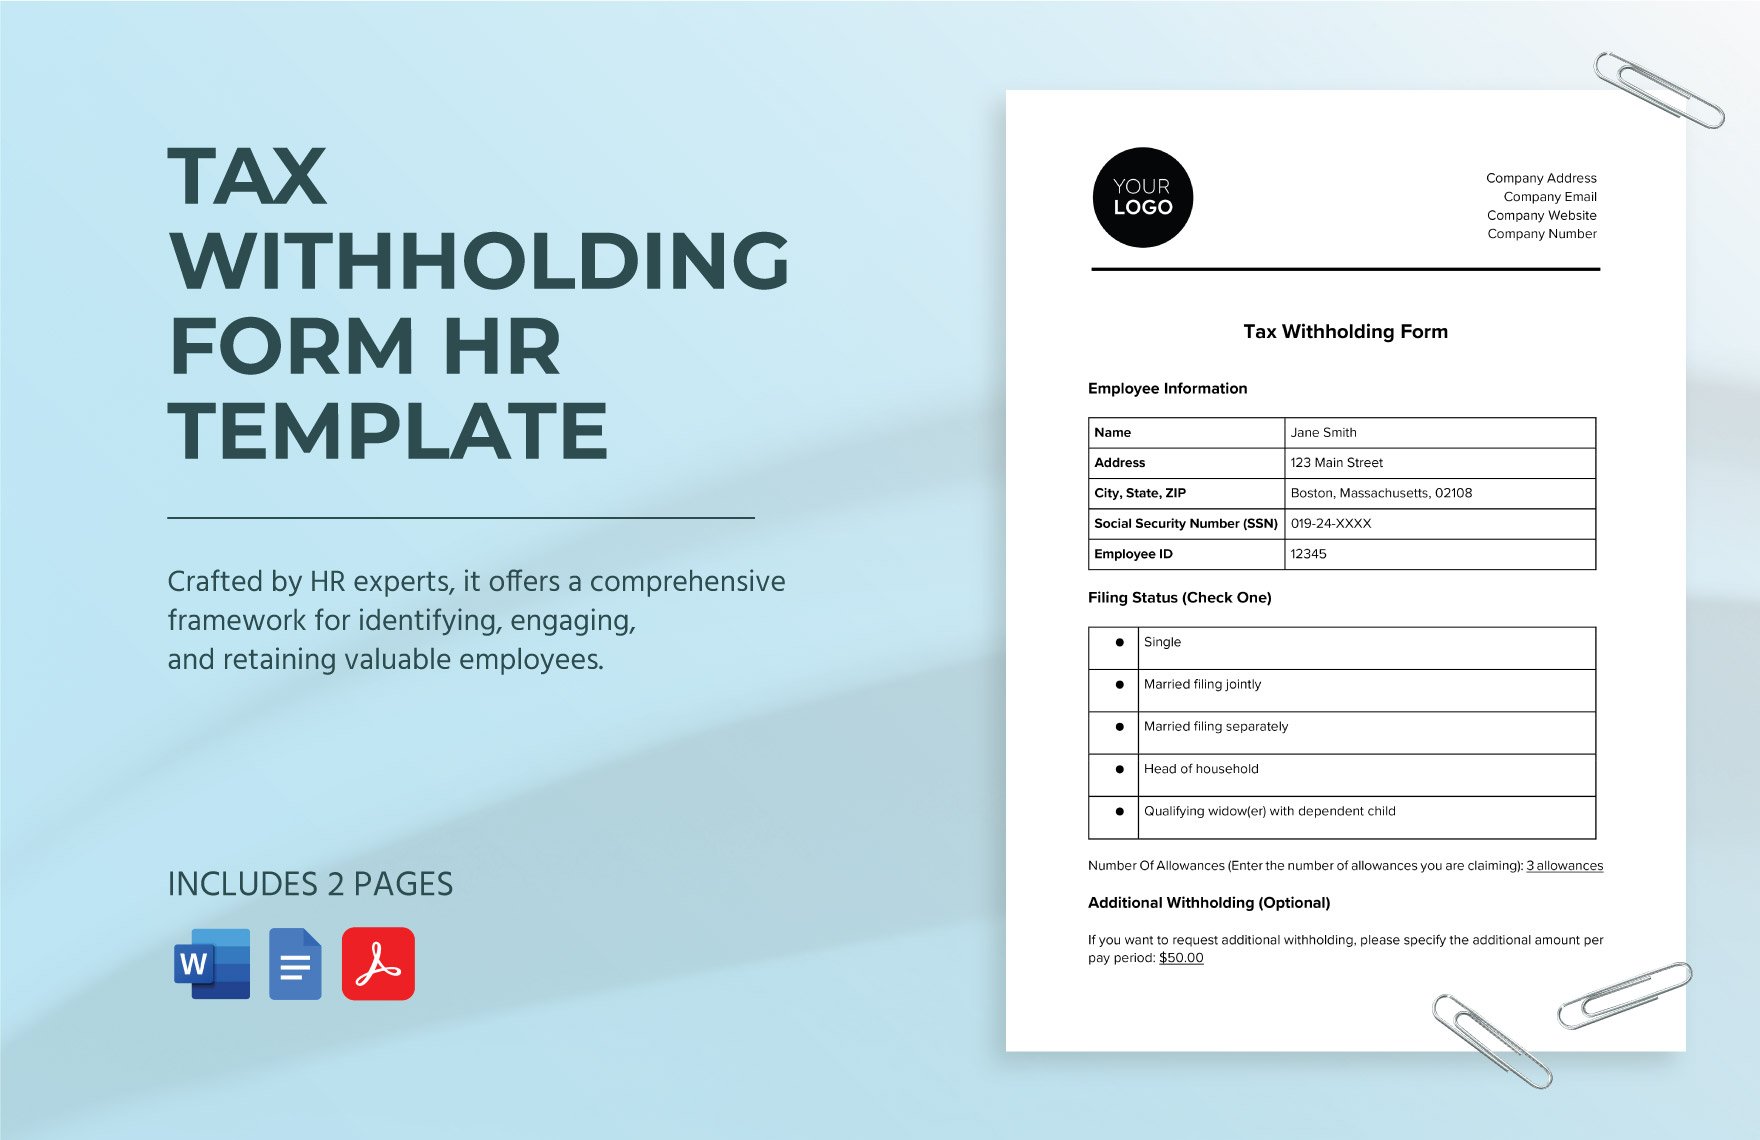 Tax Withholding Form HR Template in Word, Google Docs, PDF